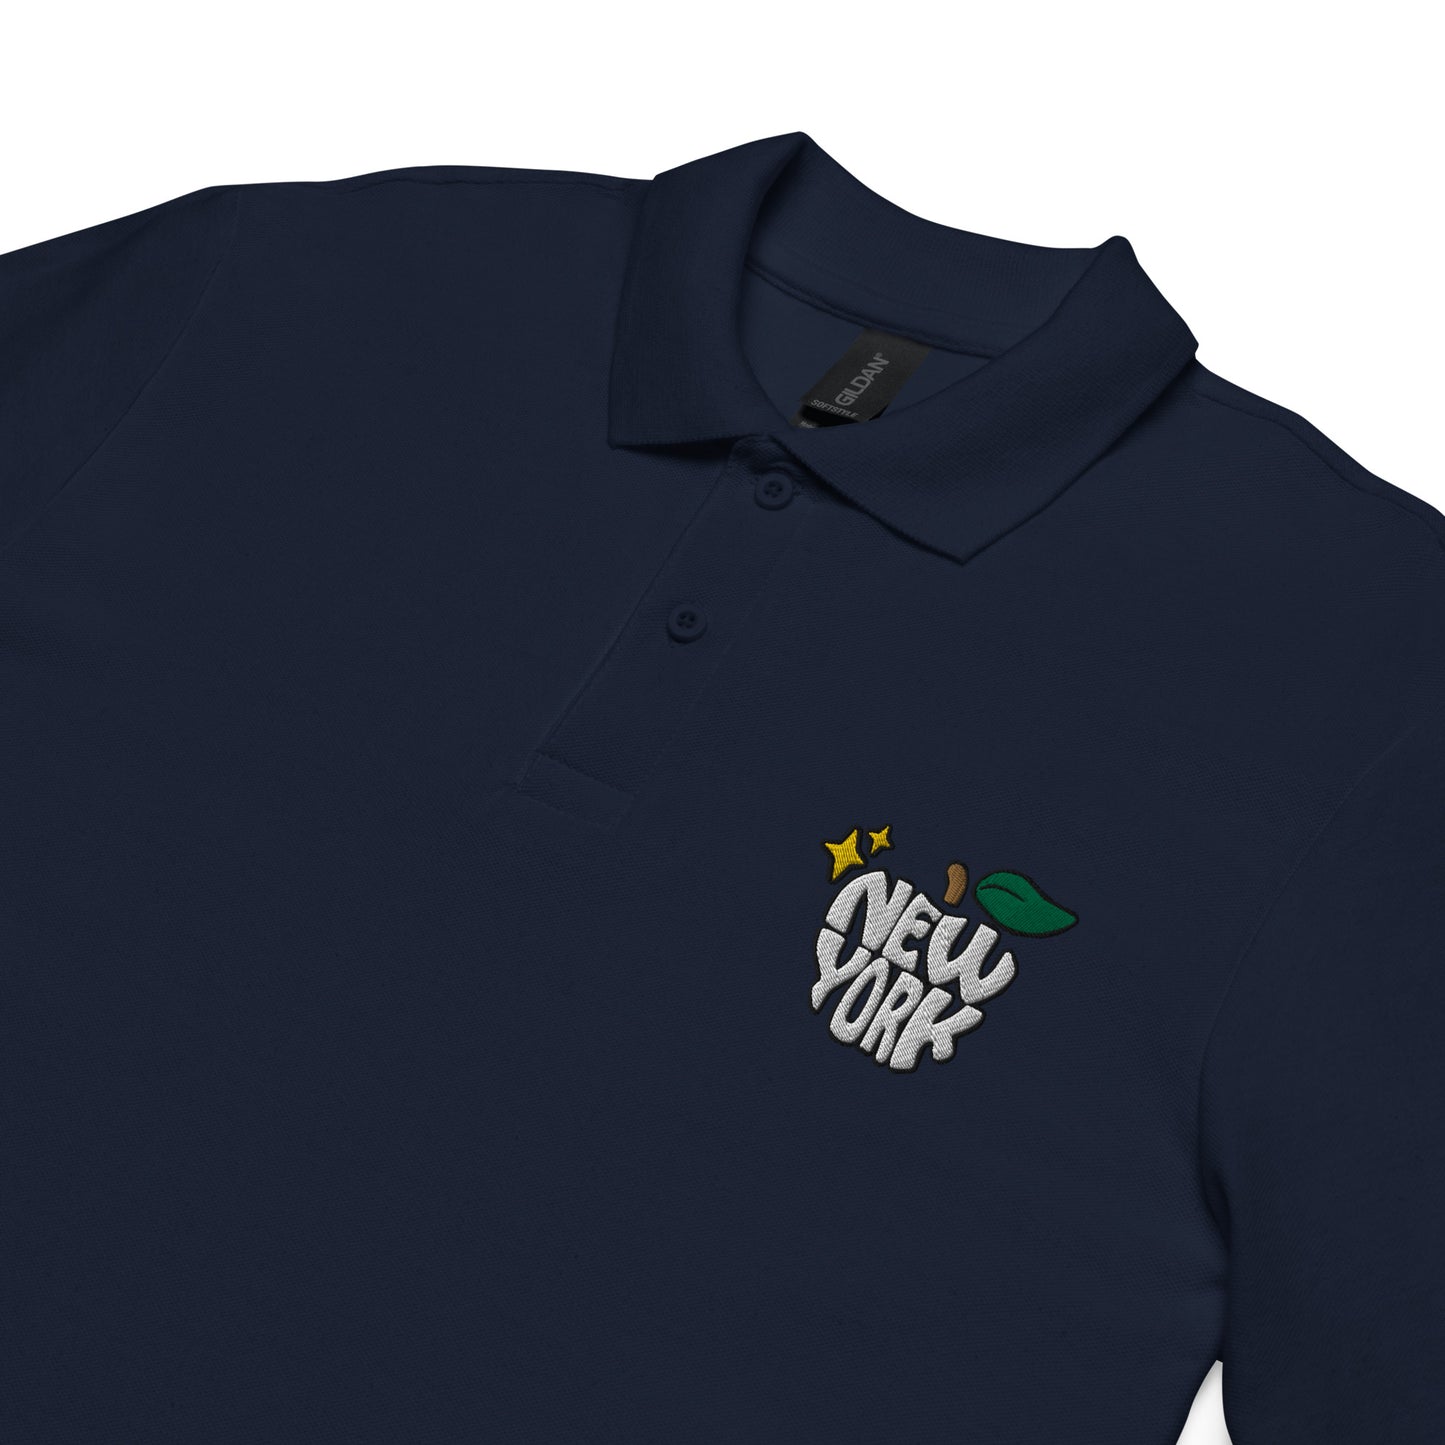 New York Apple Logo Embroidered Navy Blue Polo Shirt Scattered Streetwear